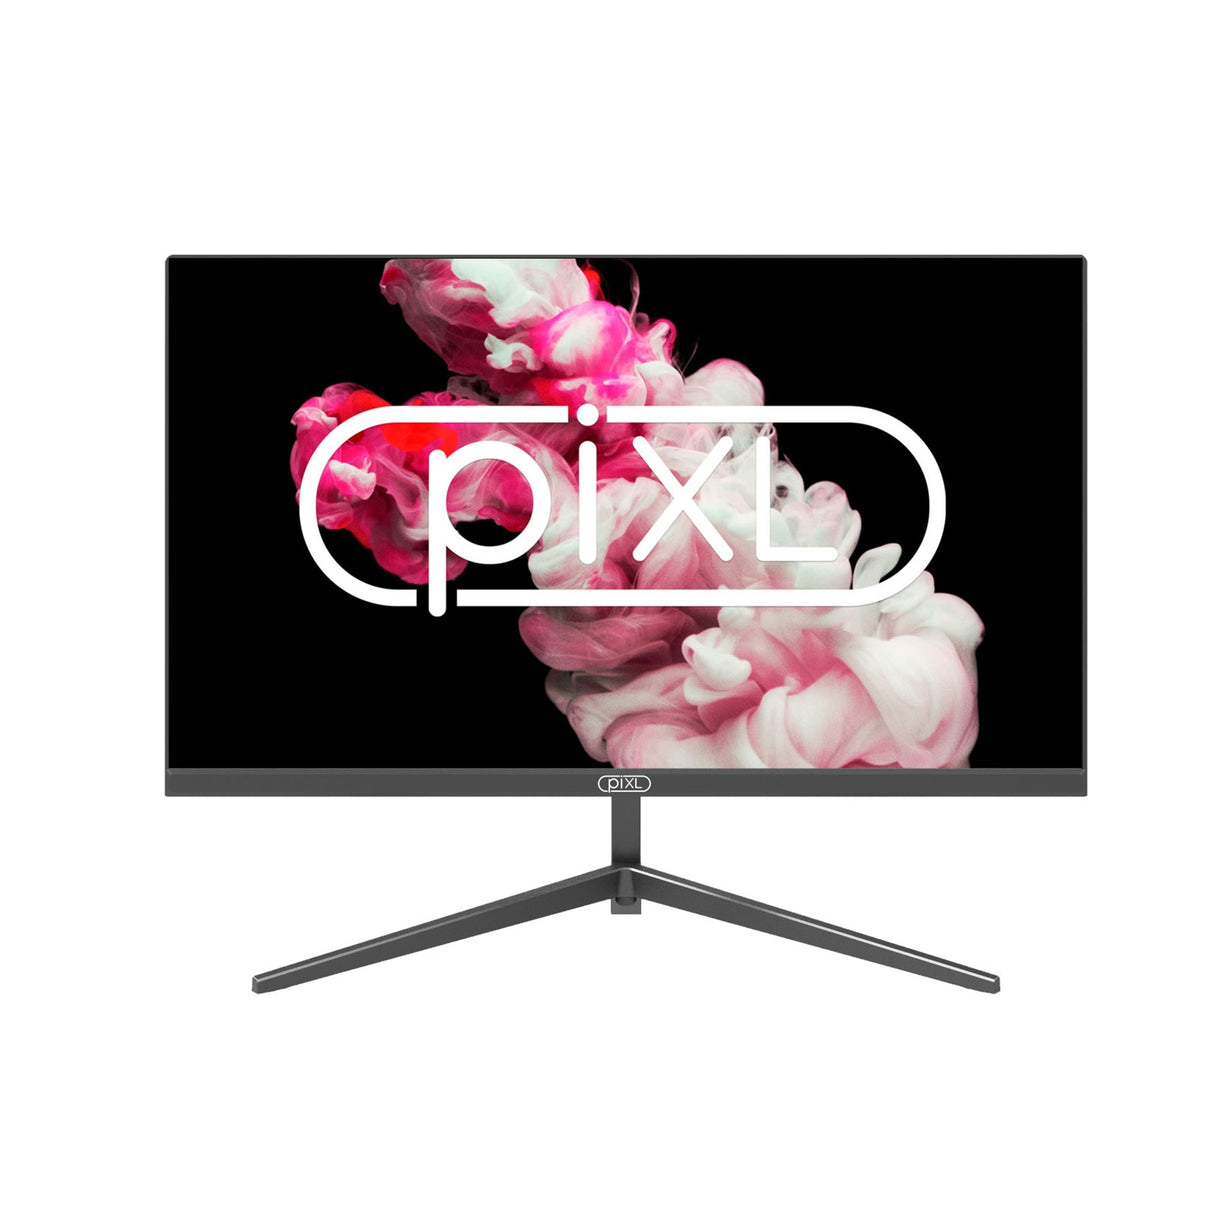 piXL PX27IHD 27 Inch Frameless Monitor, Widescreen IPS LCD Panel, True -to-Life Colours, Full HD 1920x1080, 5ms Response Time, 75Hz Refresh, HDMI, Display Port, Black Finish